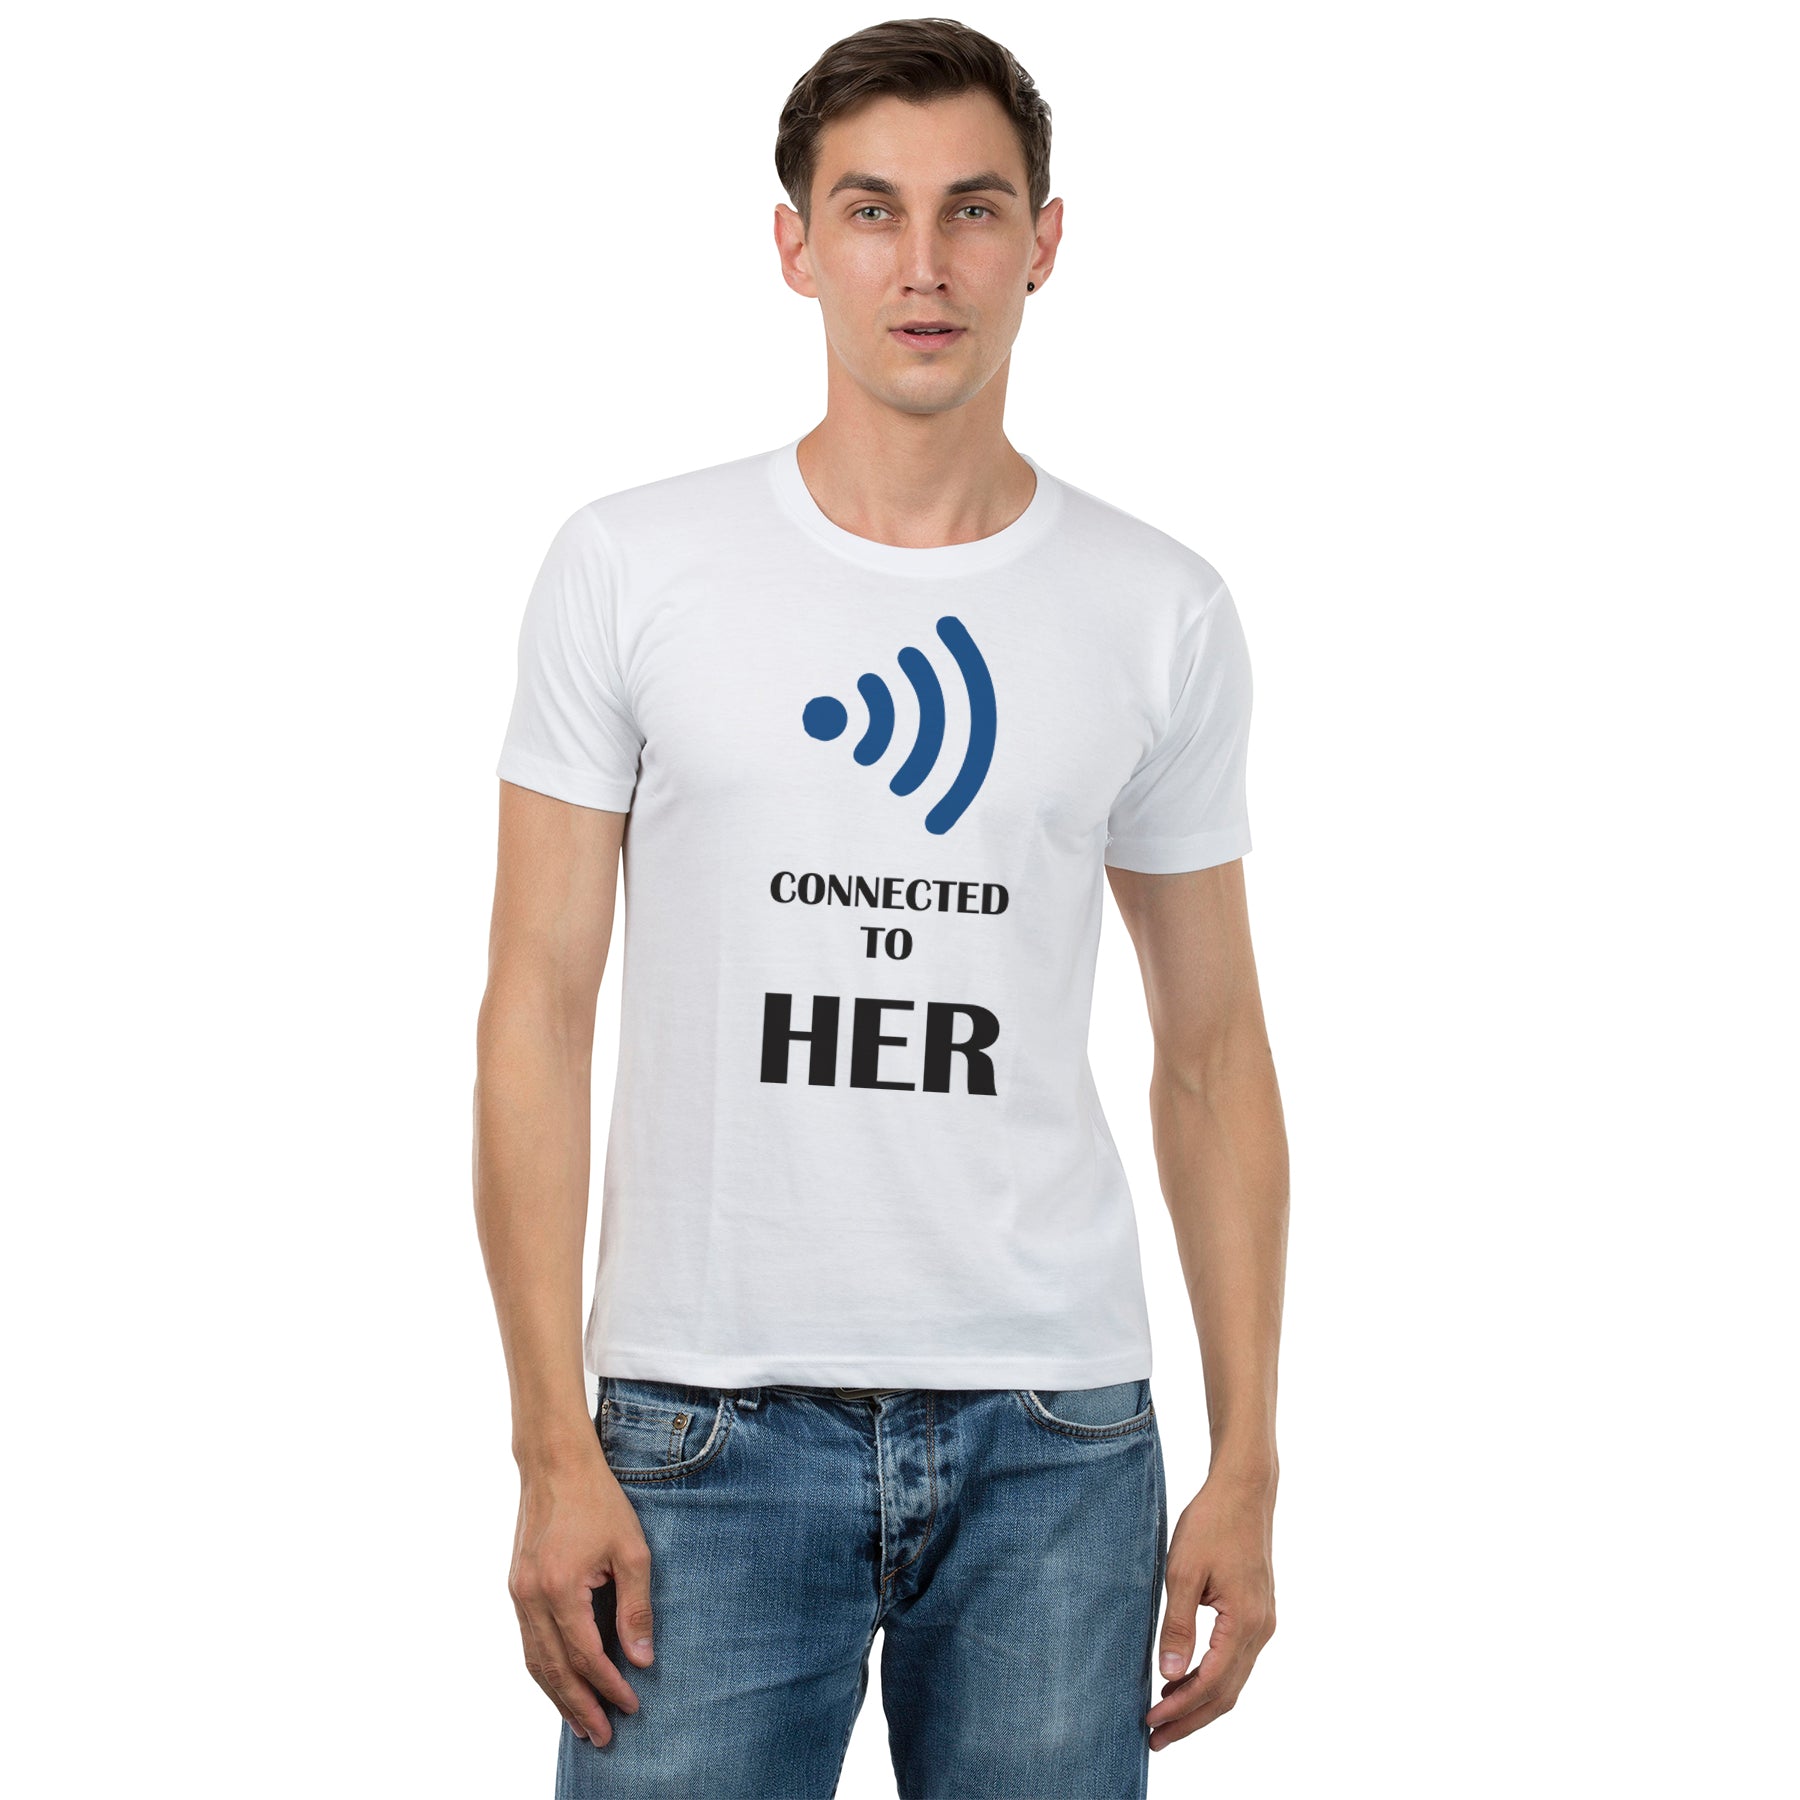 Connected to him/her  matching Couple T shirts- White